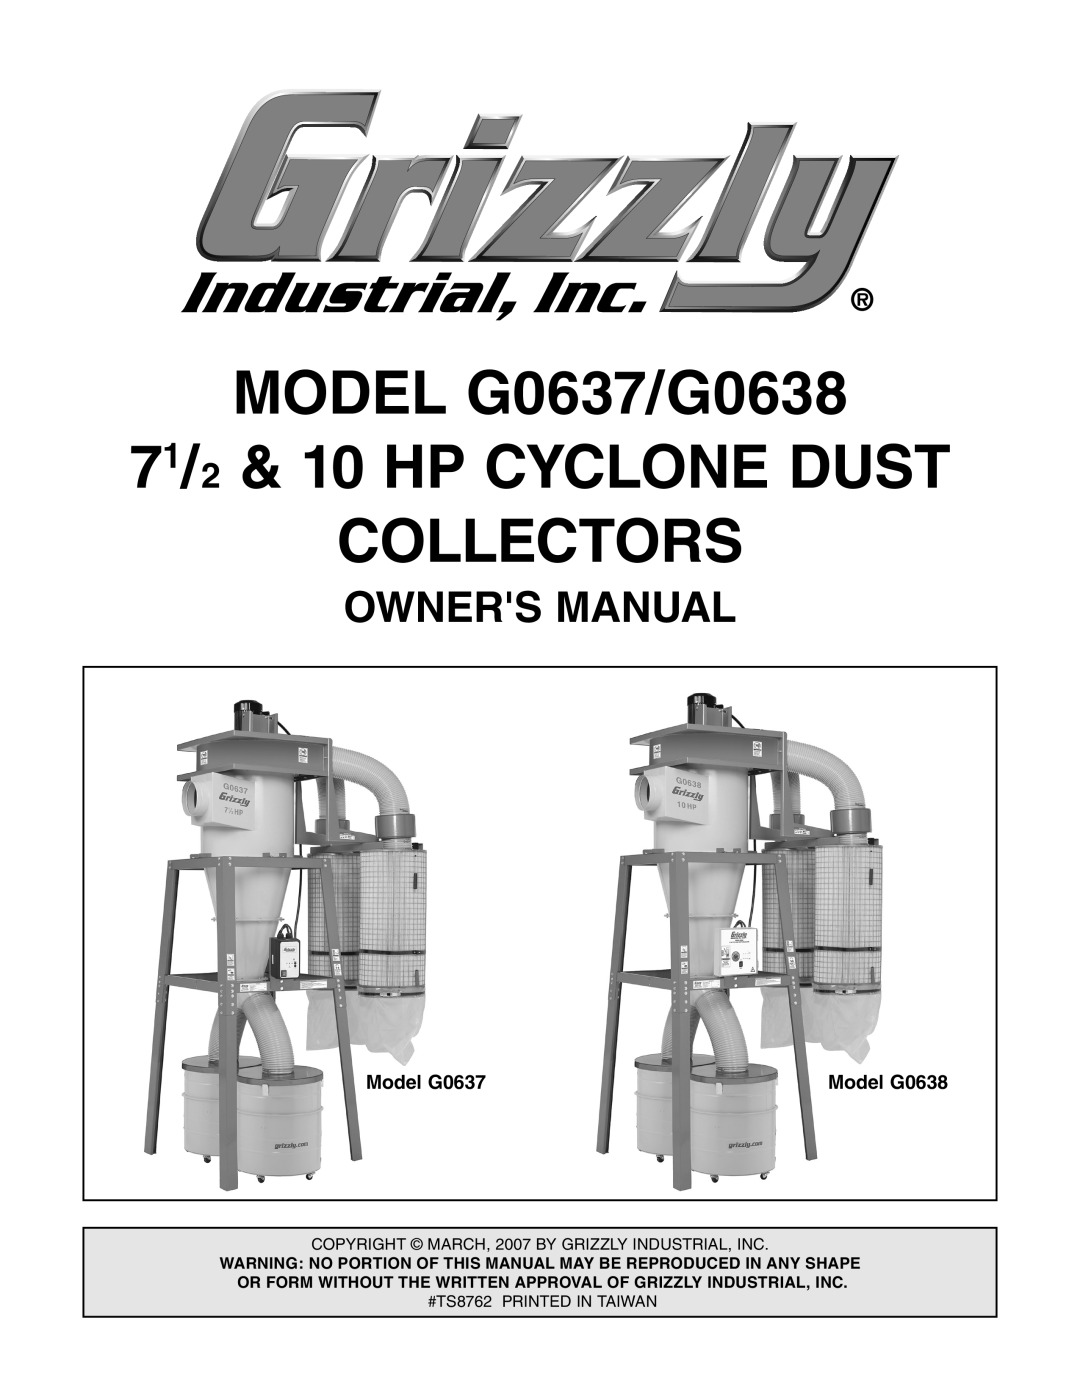 Grizzly owner manual Owners Manual, MODELS G0637 & G0638, 71⁄2 & 10 HP CYCLONE DUST COLLECTORS, BdYZa %+, BdYZa<%+ 